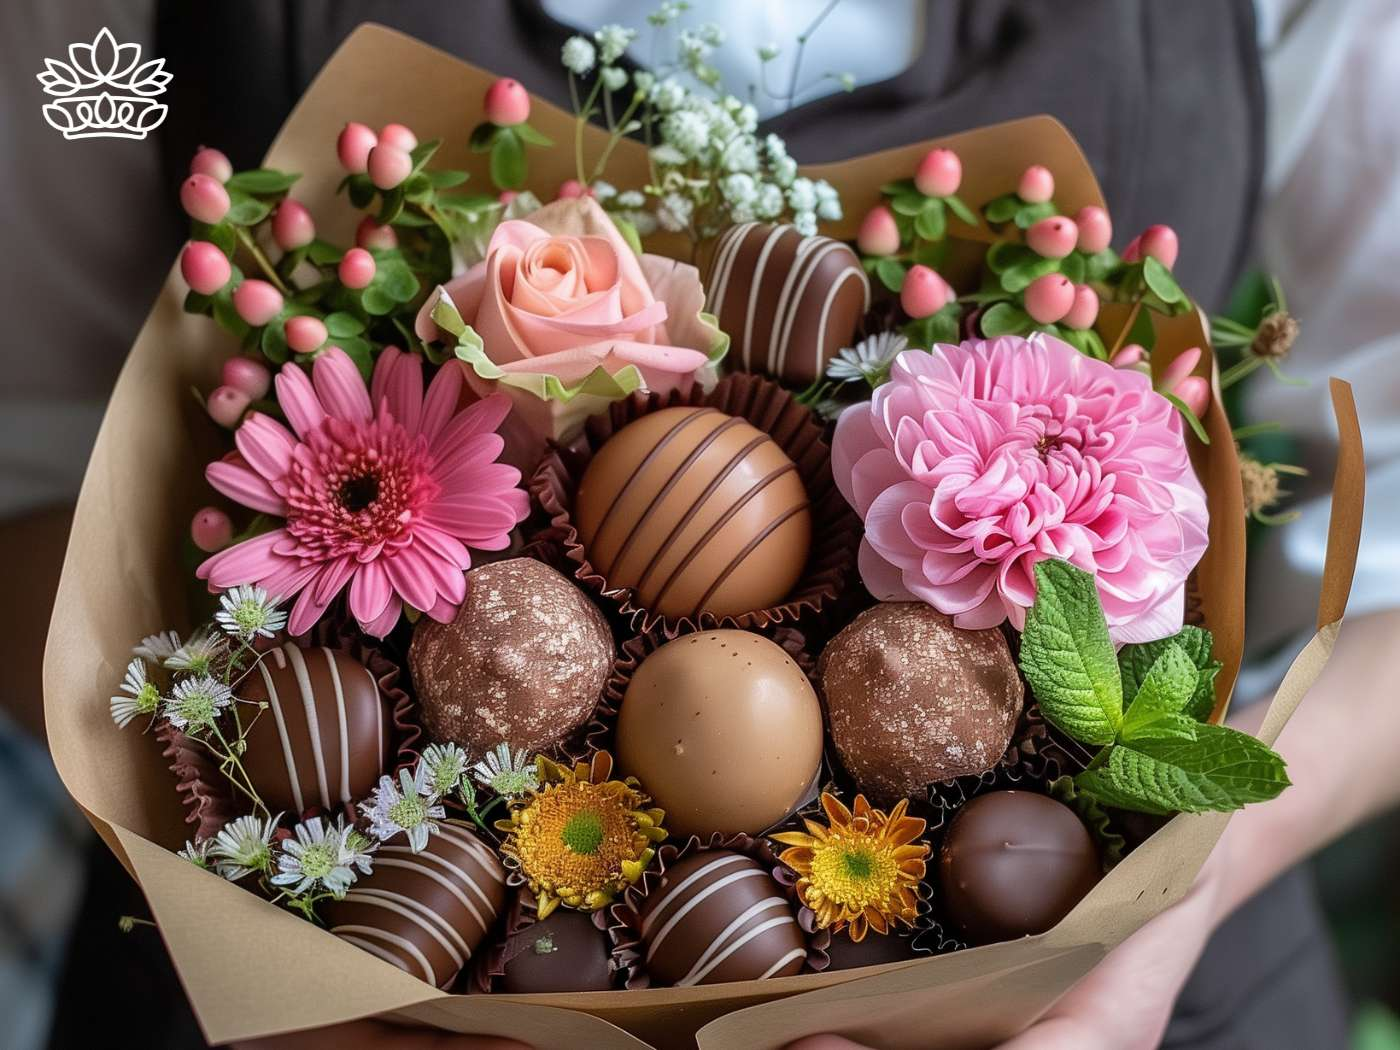 Assortment of Milk Chocolate and Sweets in a Gift Box Collection, accented with vanilla and coffee flavours, alongside macadamia biscuits, presented with Fabulous Flowers and Gifts for the ultimate Chocolate Lover's Gift Hamper.